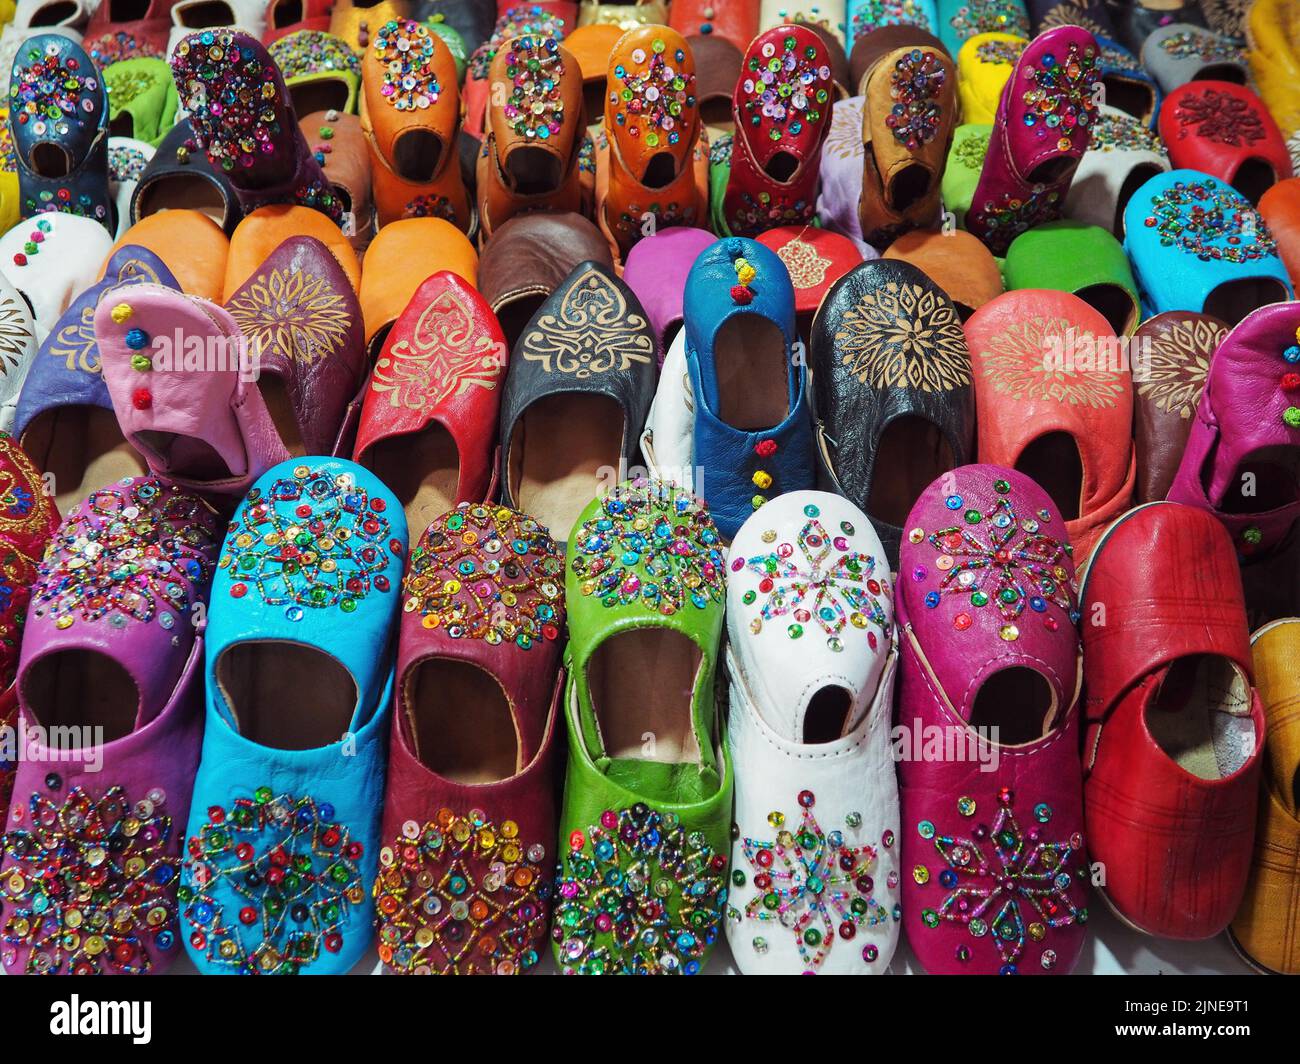 Handmade colourful babouche - leather slippers on display at traditional souk - street market in Morocco Stock Photo